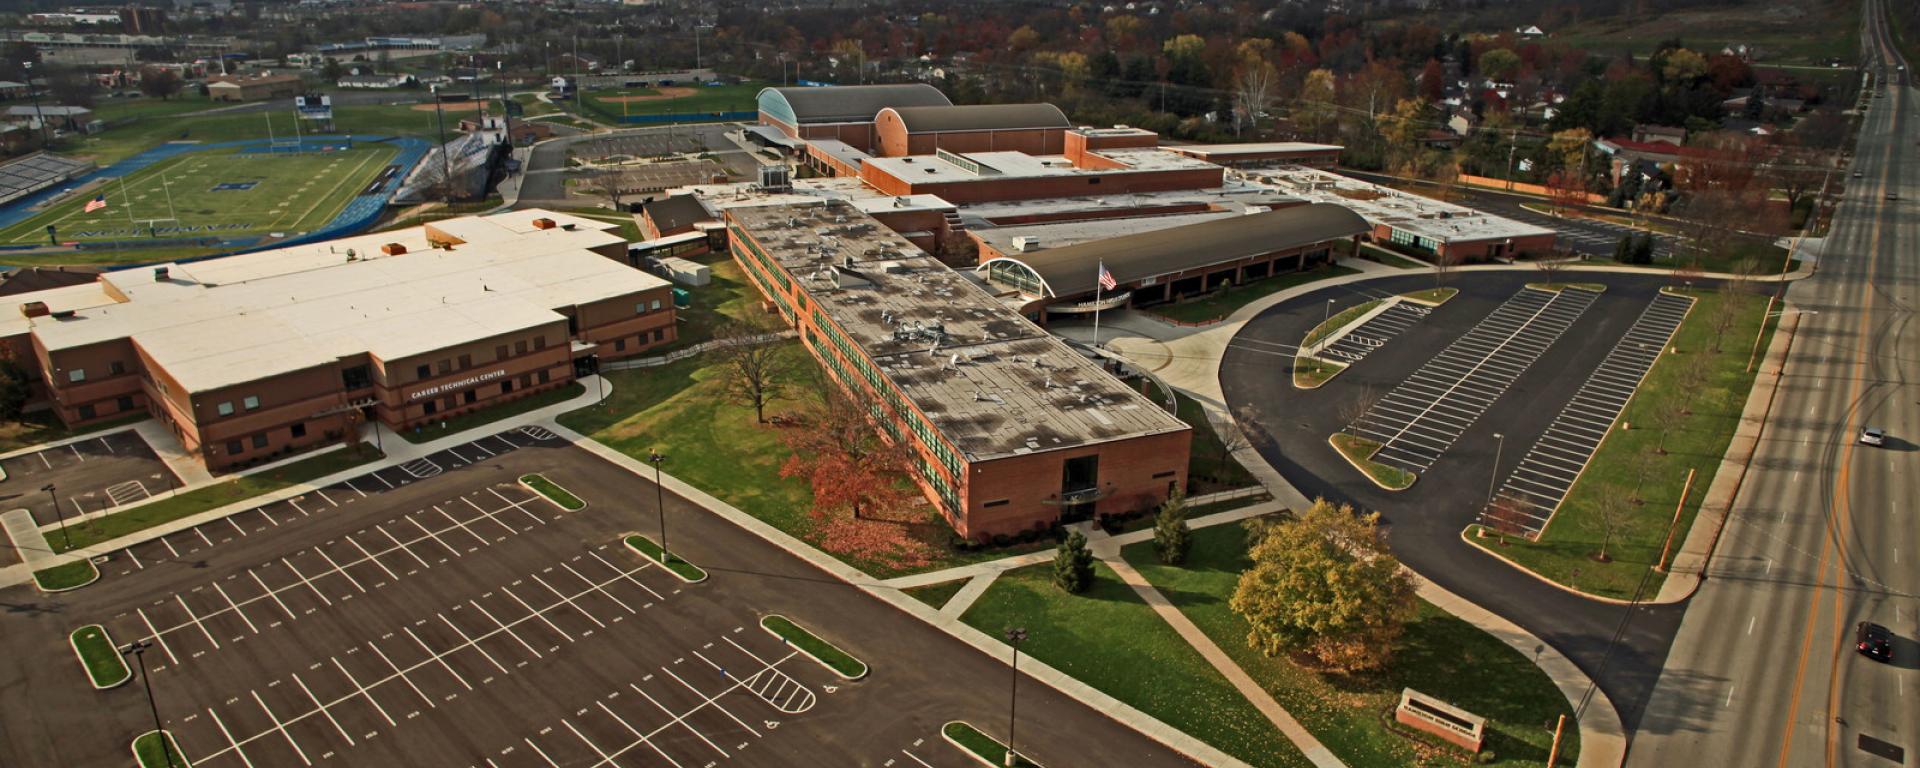 aerial view of school and sports complex